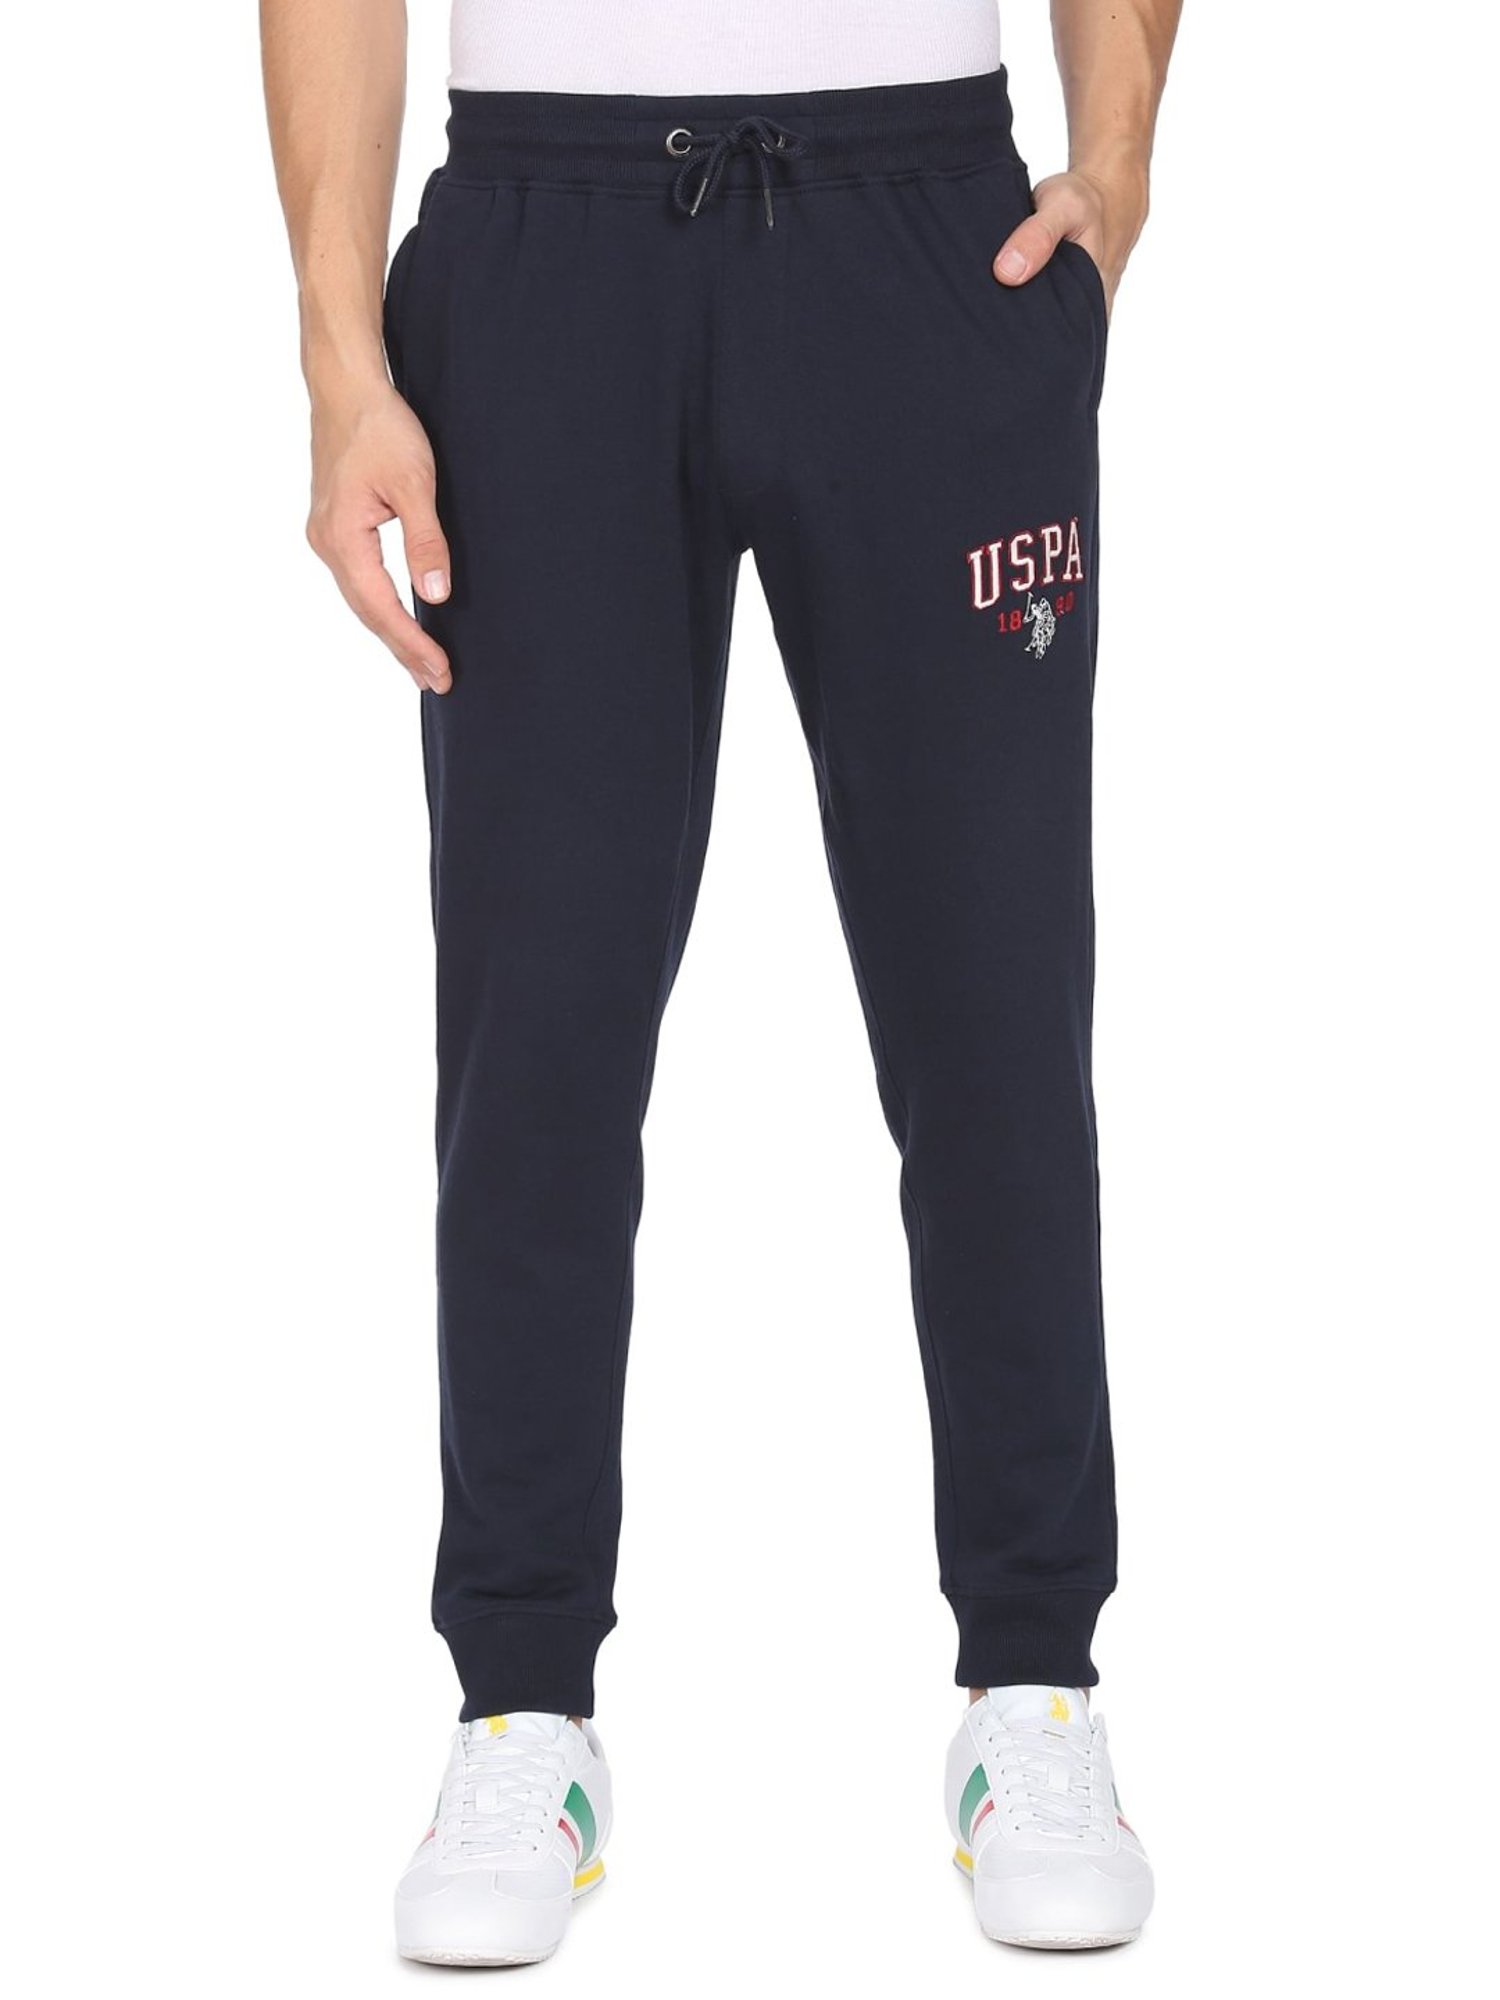 US POLO ASSN. Unisex Track Jogger Draw String Sweat Pants Running Active  Sports. | eBay